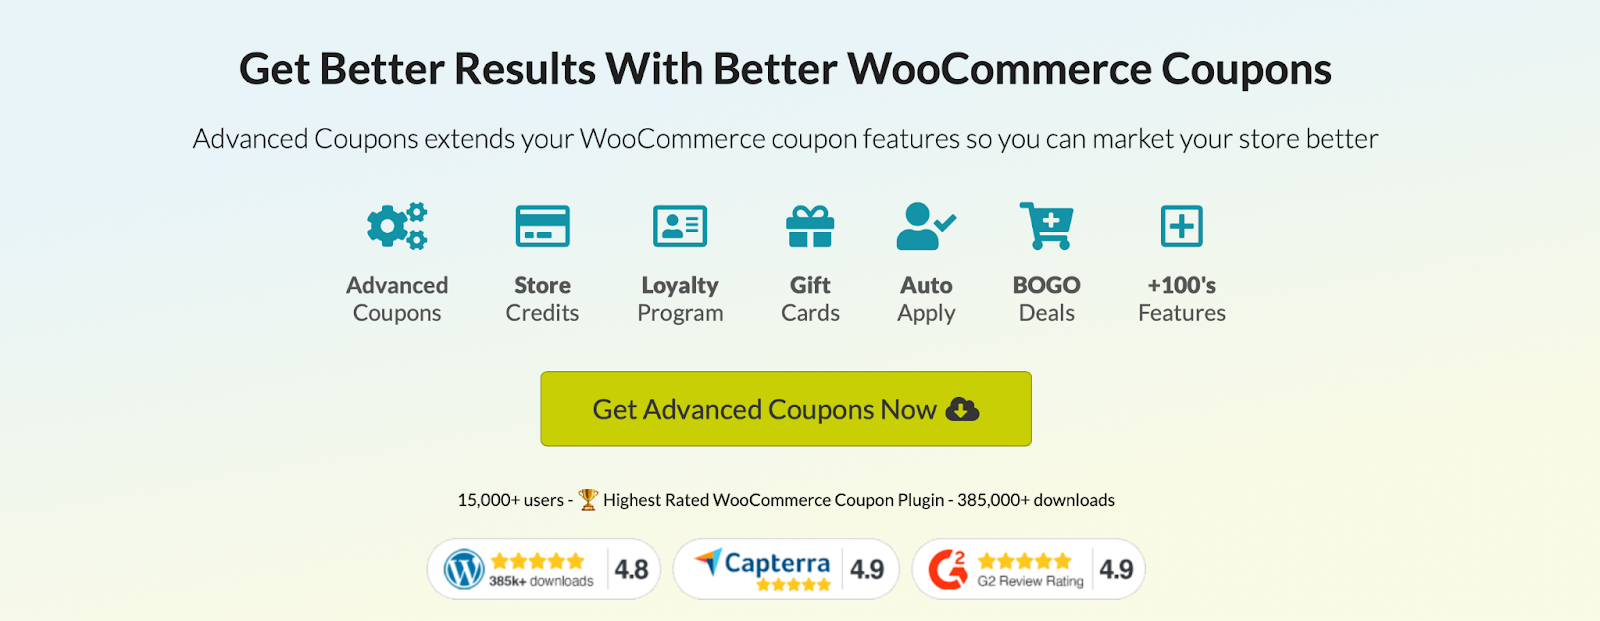 Advanced Coupons is a WooCommerce plugin that can help you create loyalty programs and online coupons.